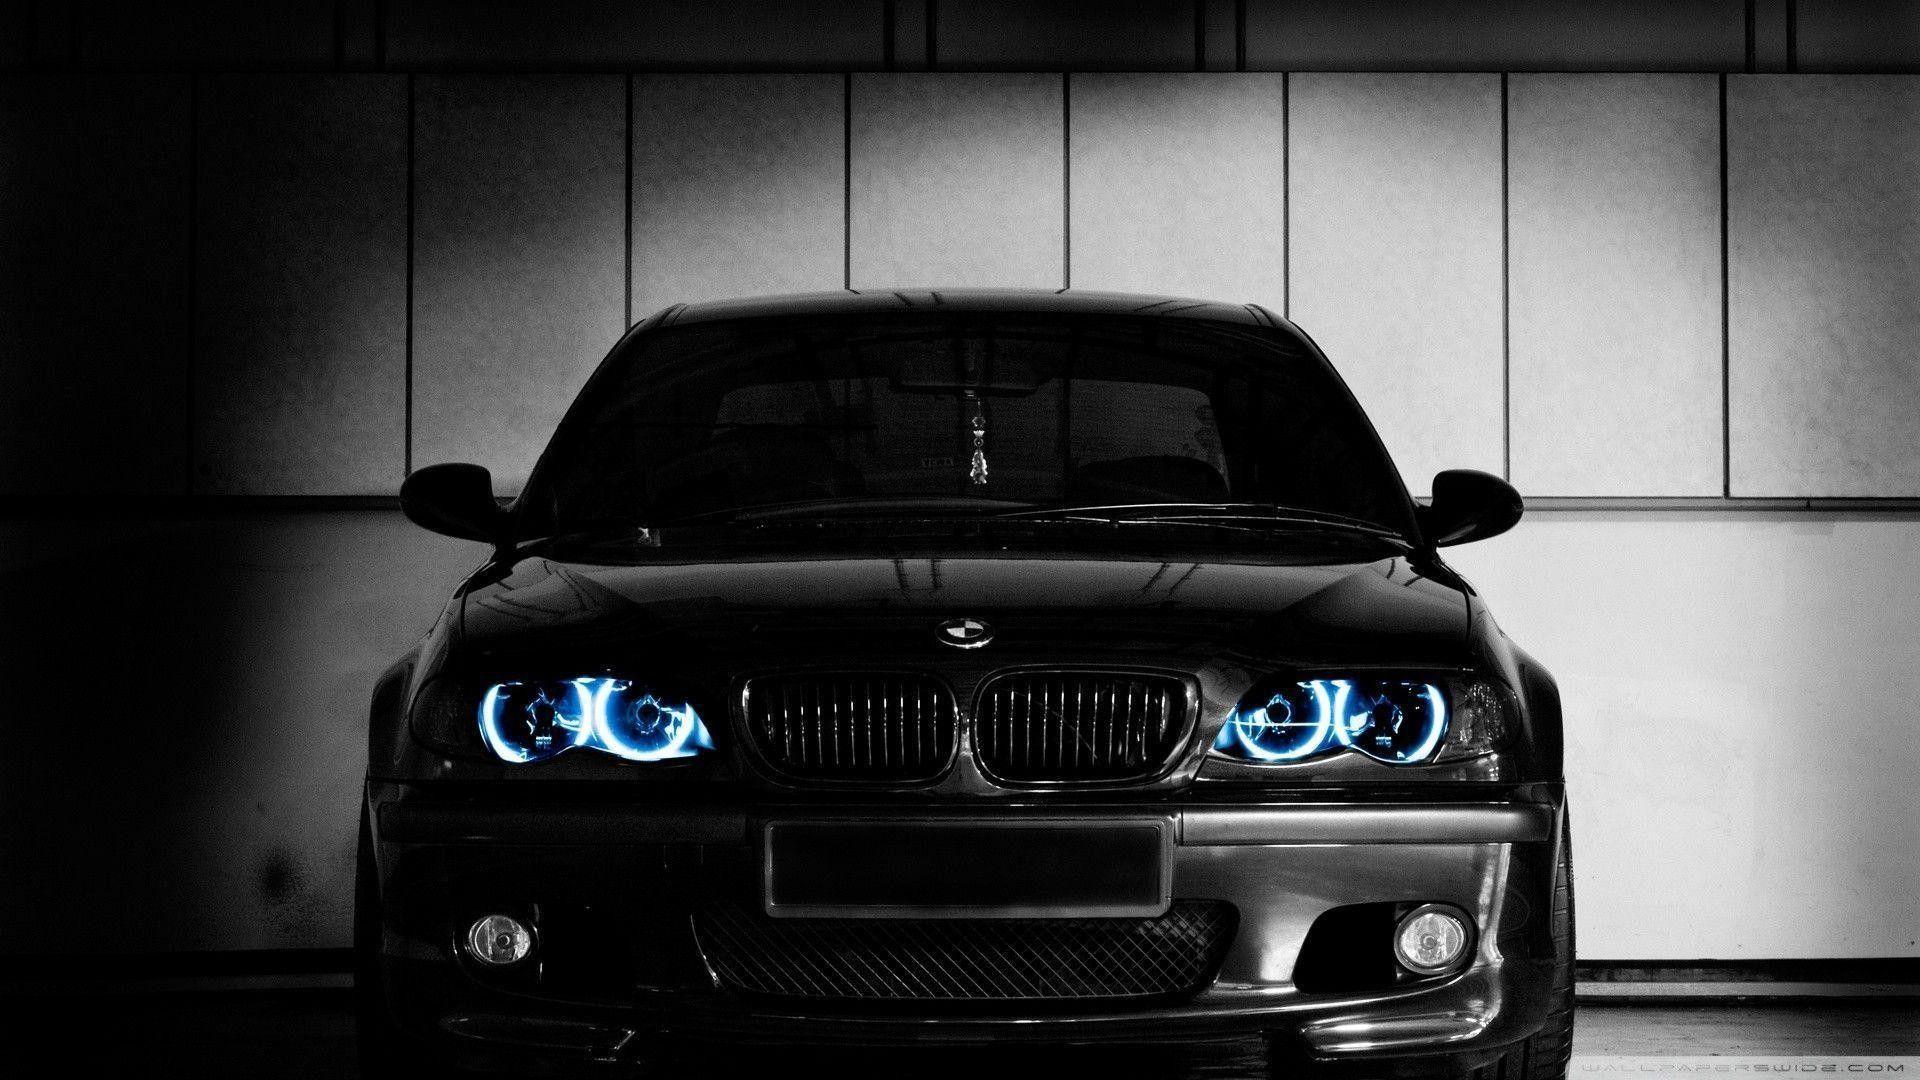 Bmw E46 Wallpapers Top Free Bmw E46 Backgrounds Wallpaperaccess